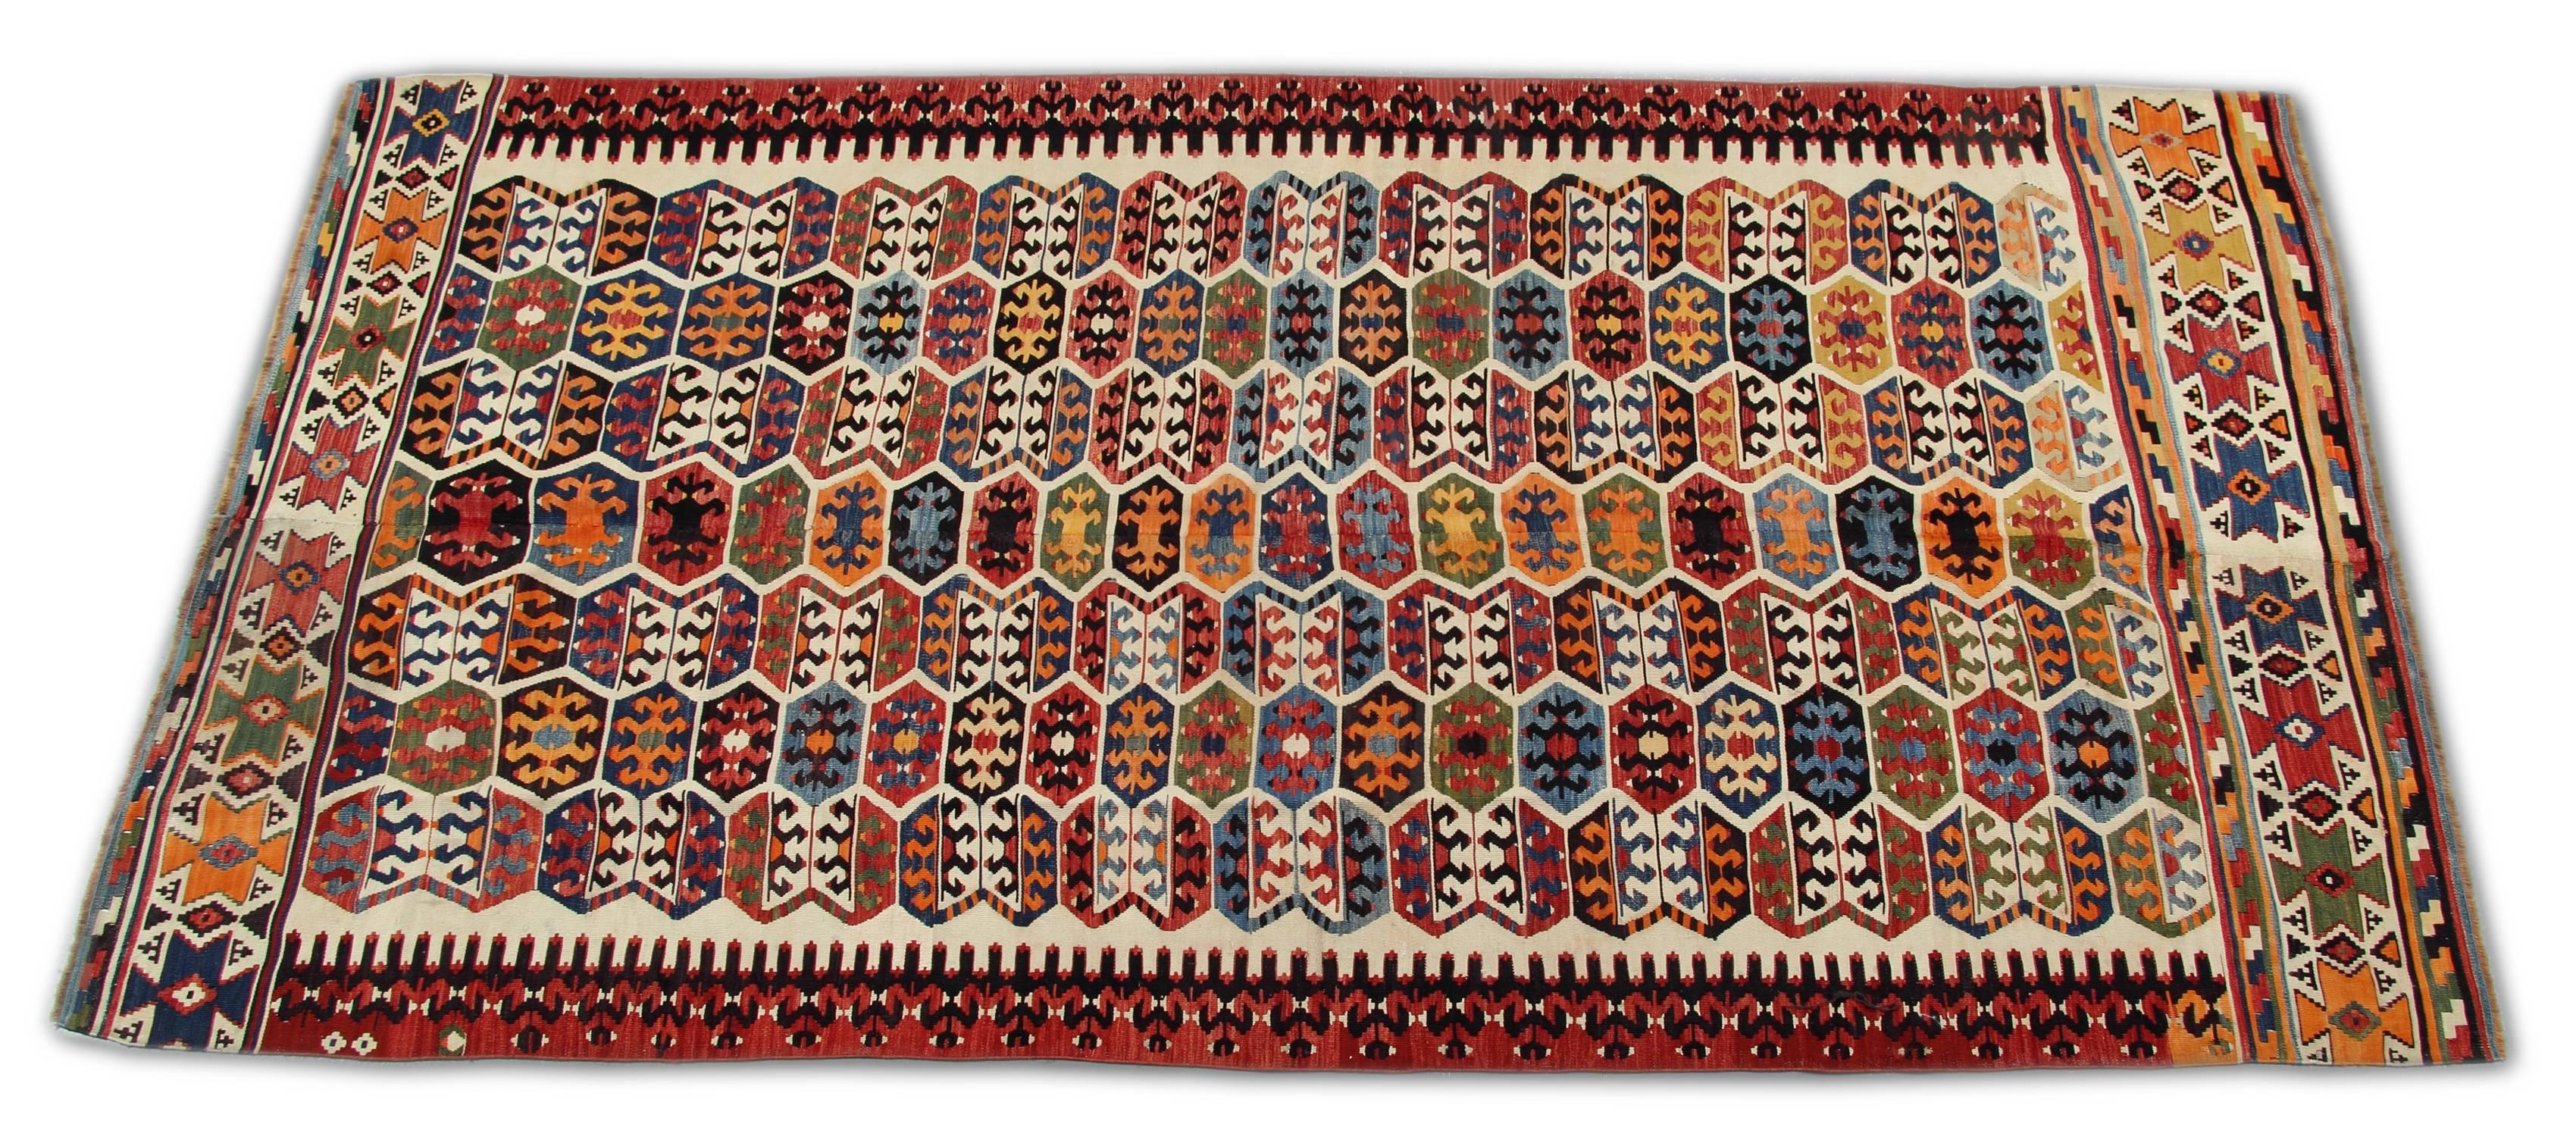 This handmade carpet oriental rug colorful Rug is a Turkish carpet rug has woven by very skilled weavers in Turkey, who used the highest quality wool and cotton. The flat-weave rug has light red, orange, rich green, white, gold, yellow and dark